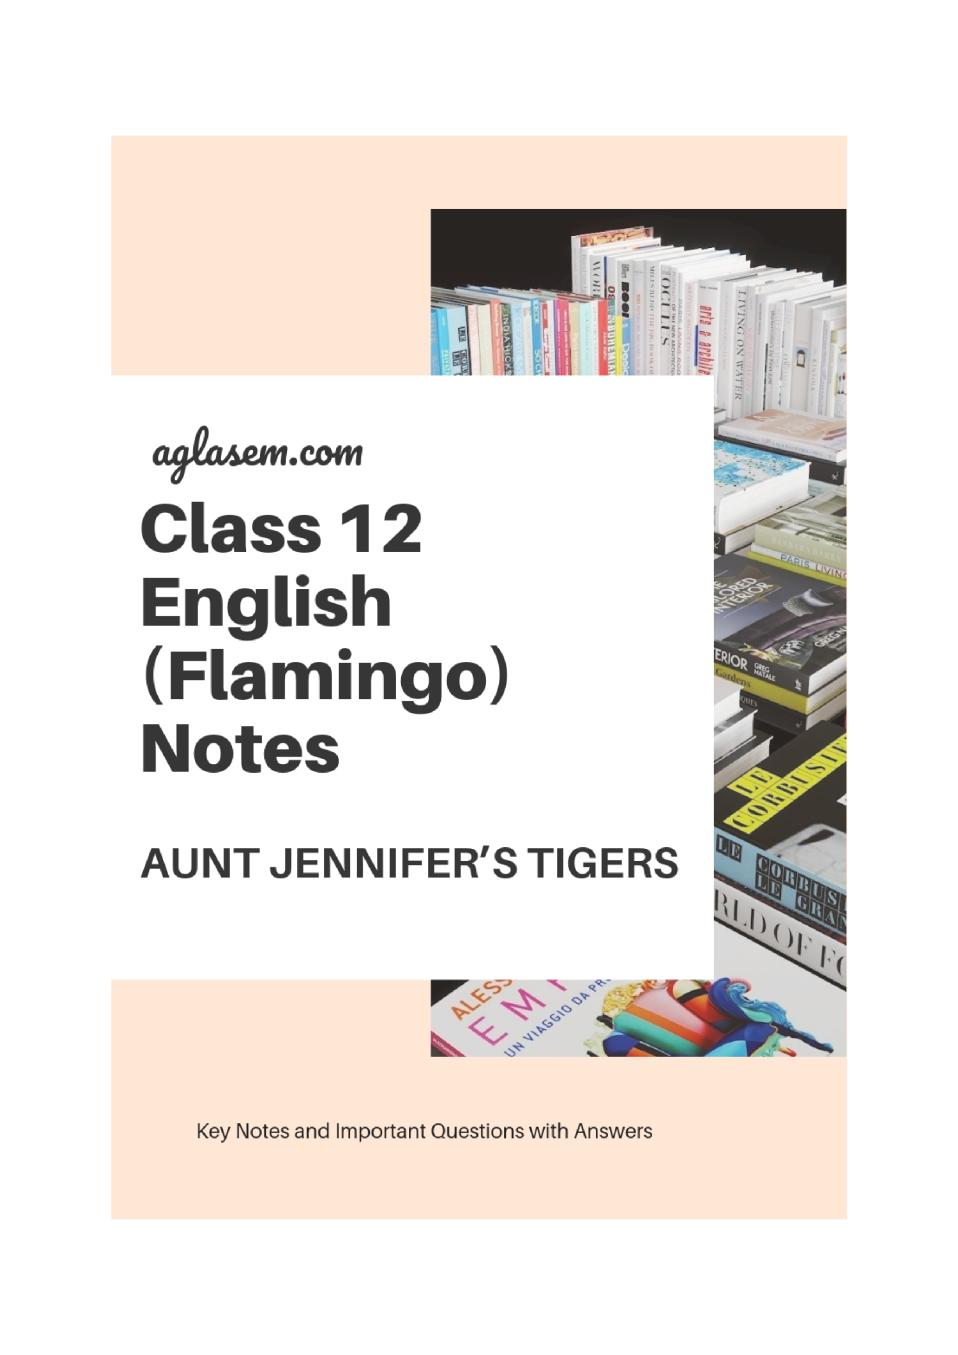 Class 12 English Flamingo Notes For Aunt Jennifer’s Tigers - Page 1